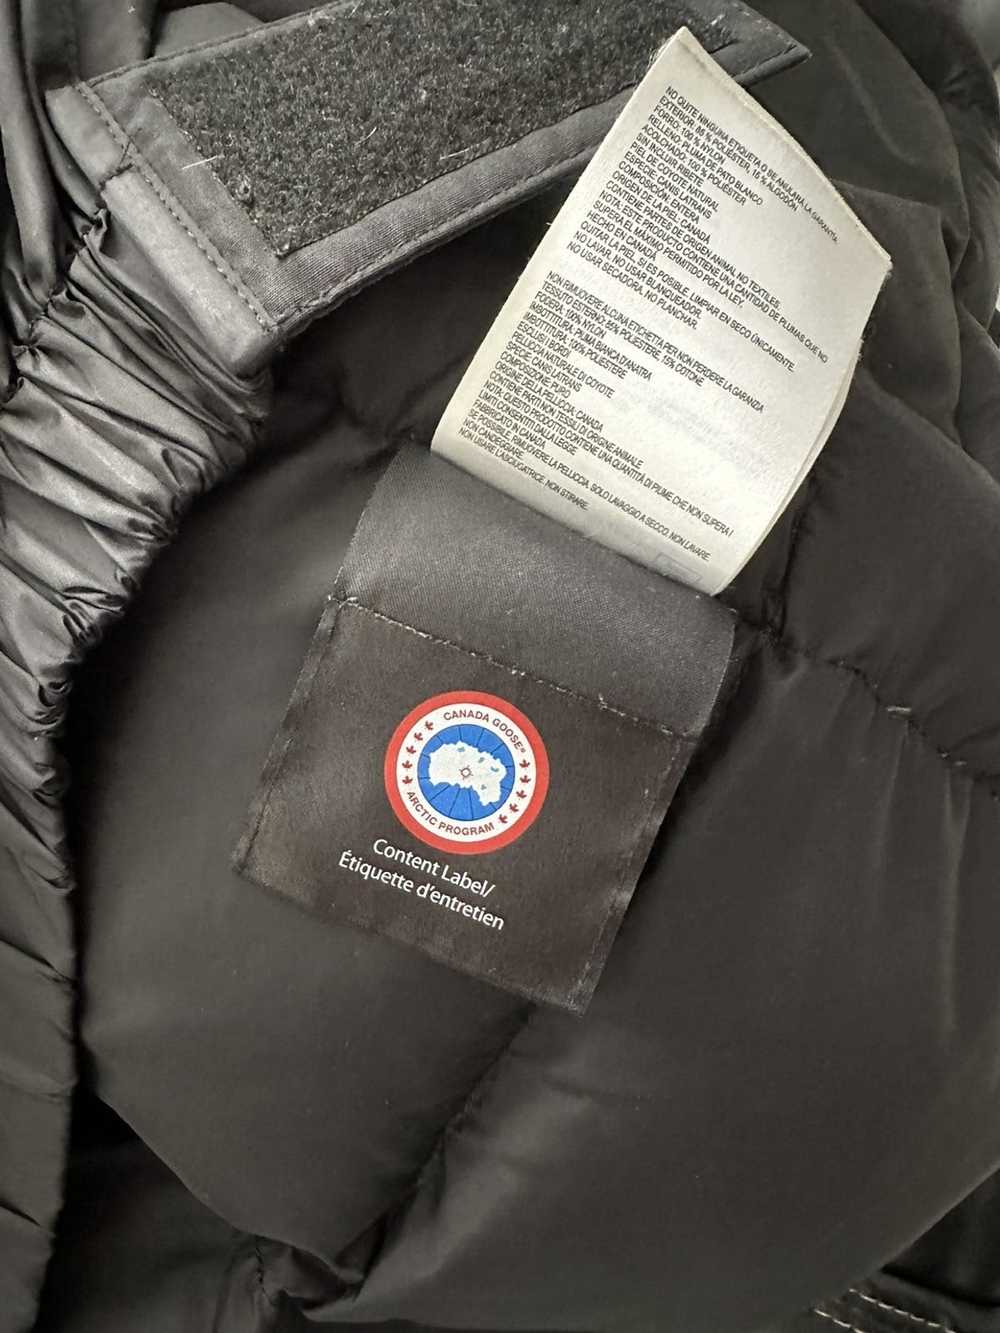 Canada Goose Expedition Parka - image 8